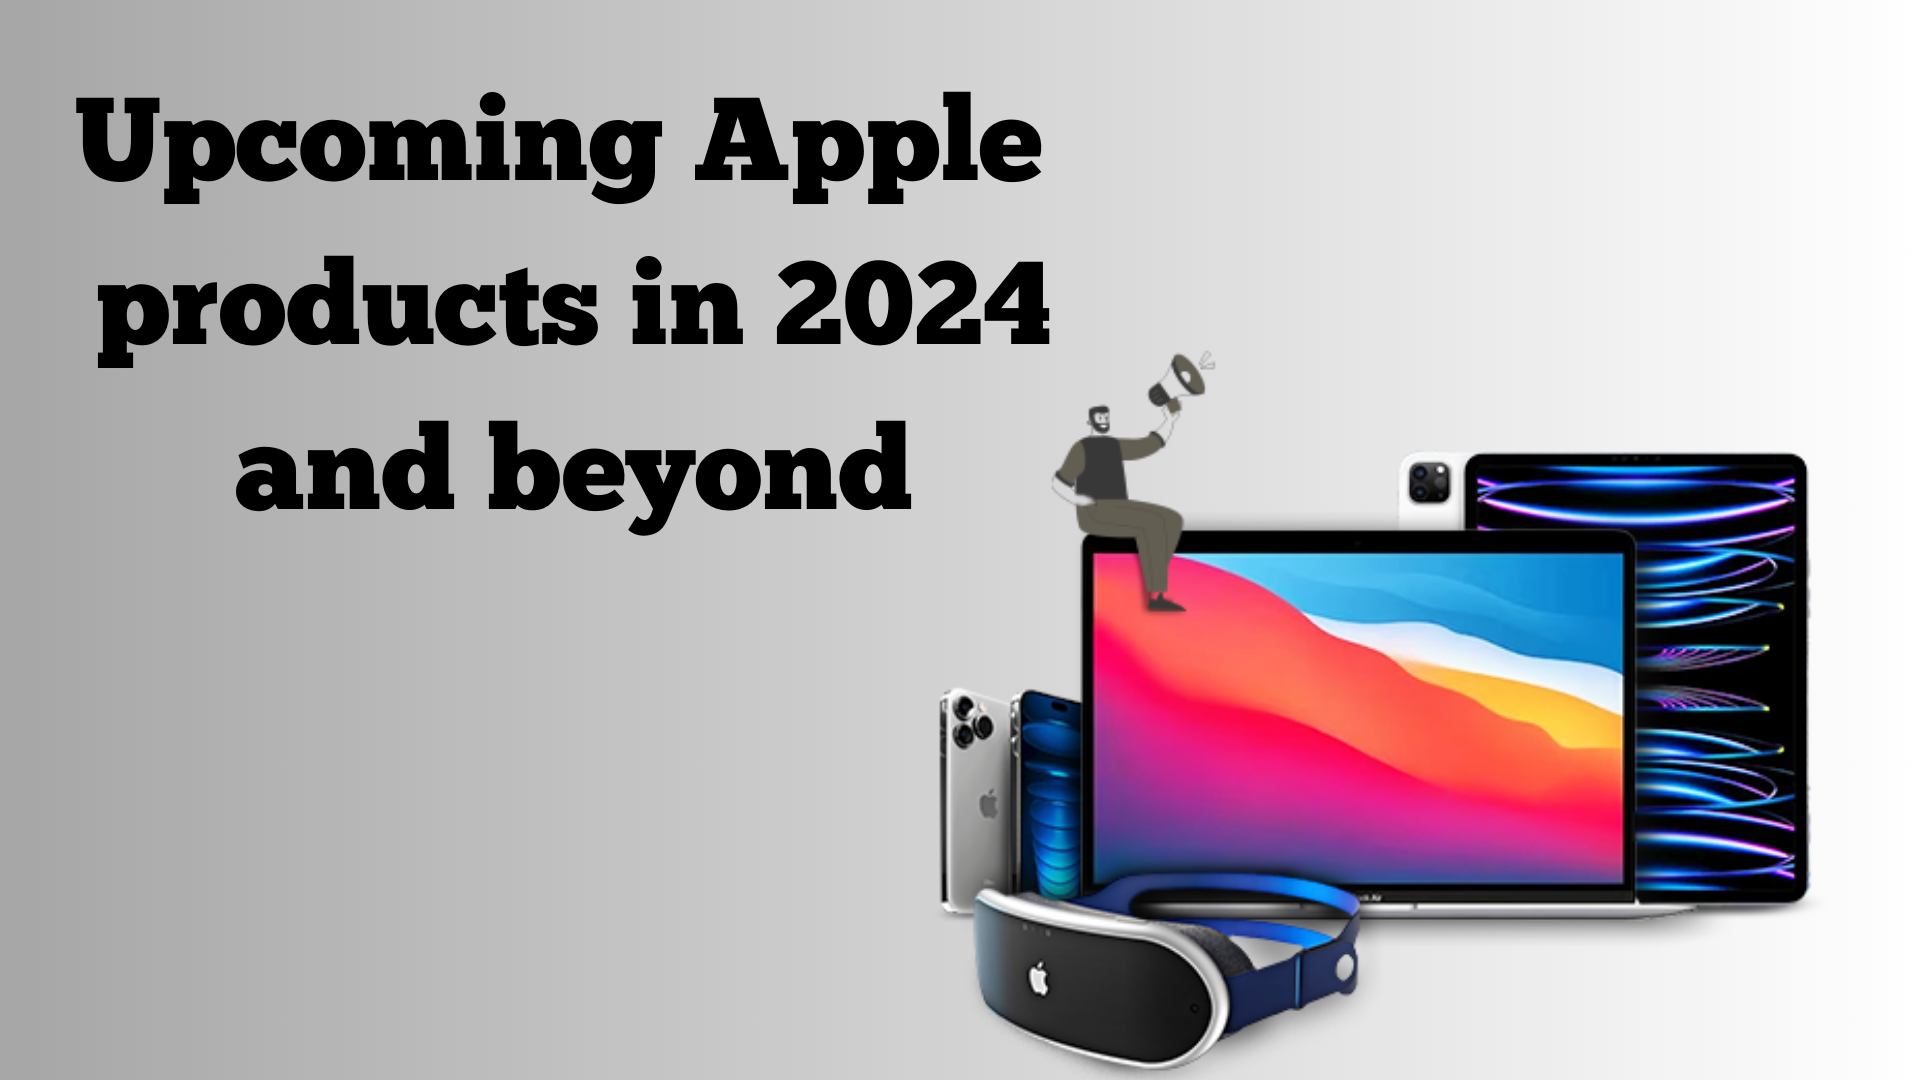 Upcoming Apple products in 2024 and beyond